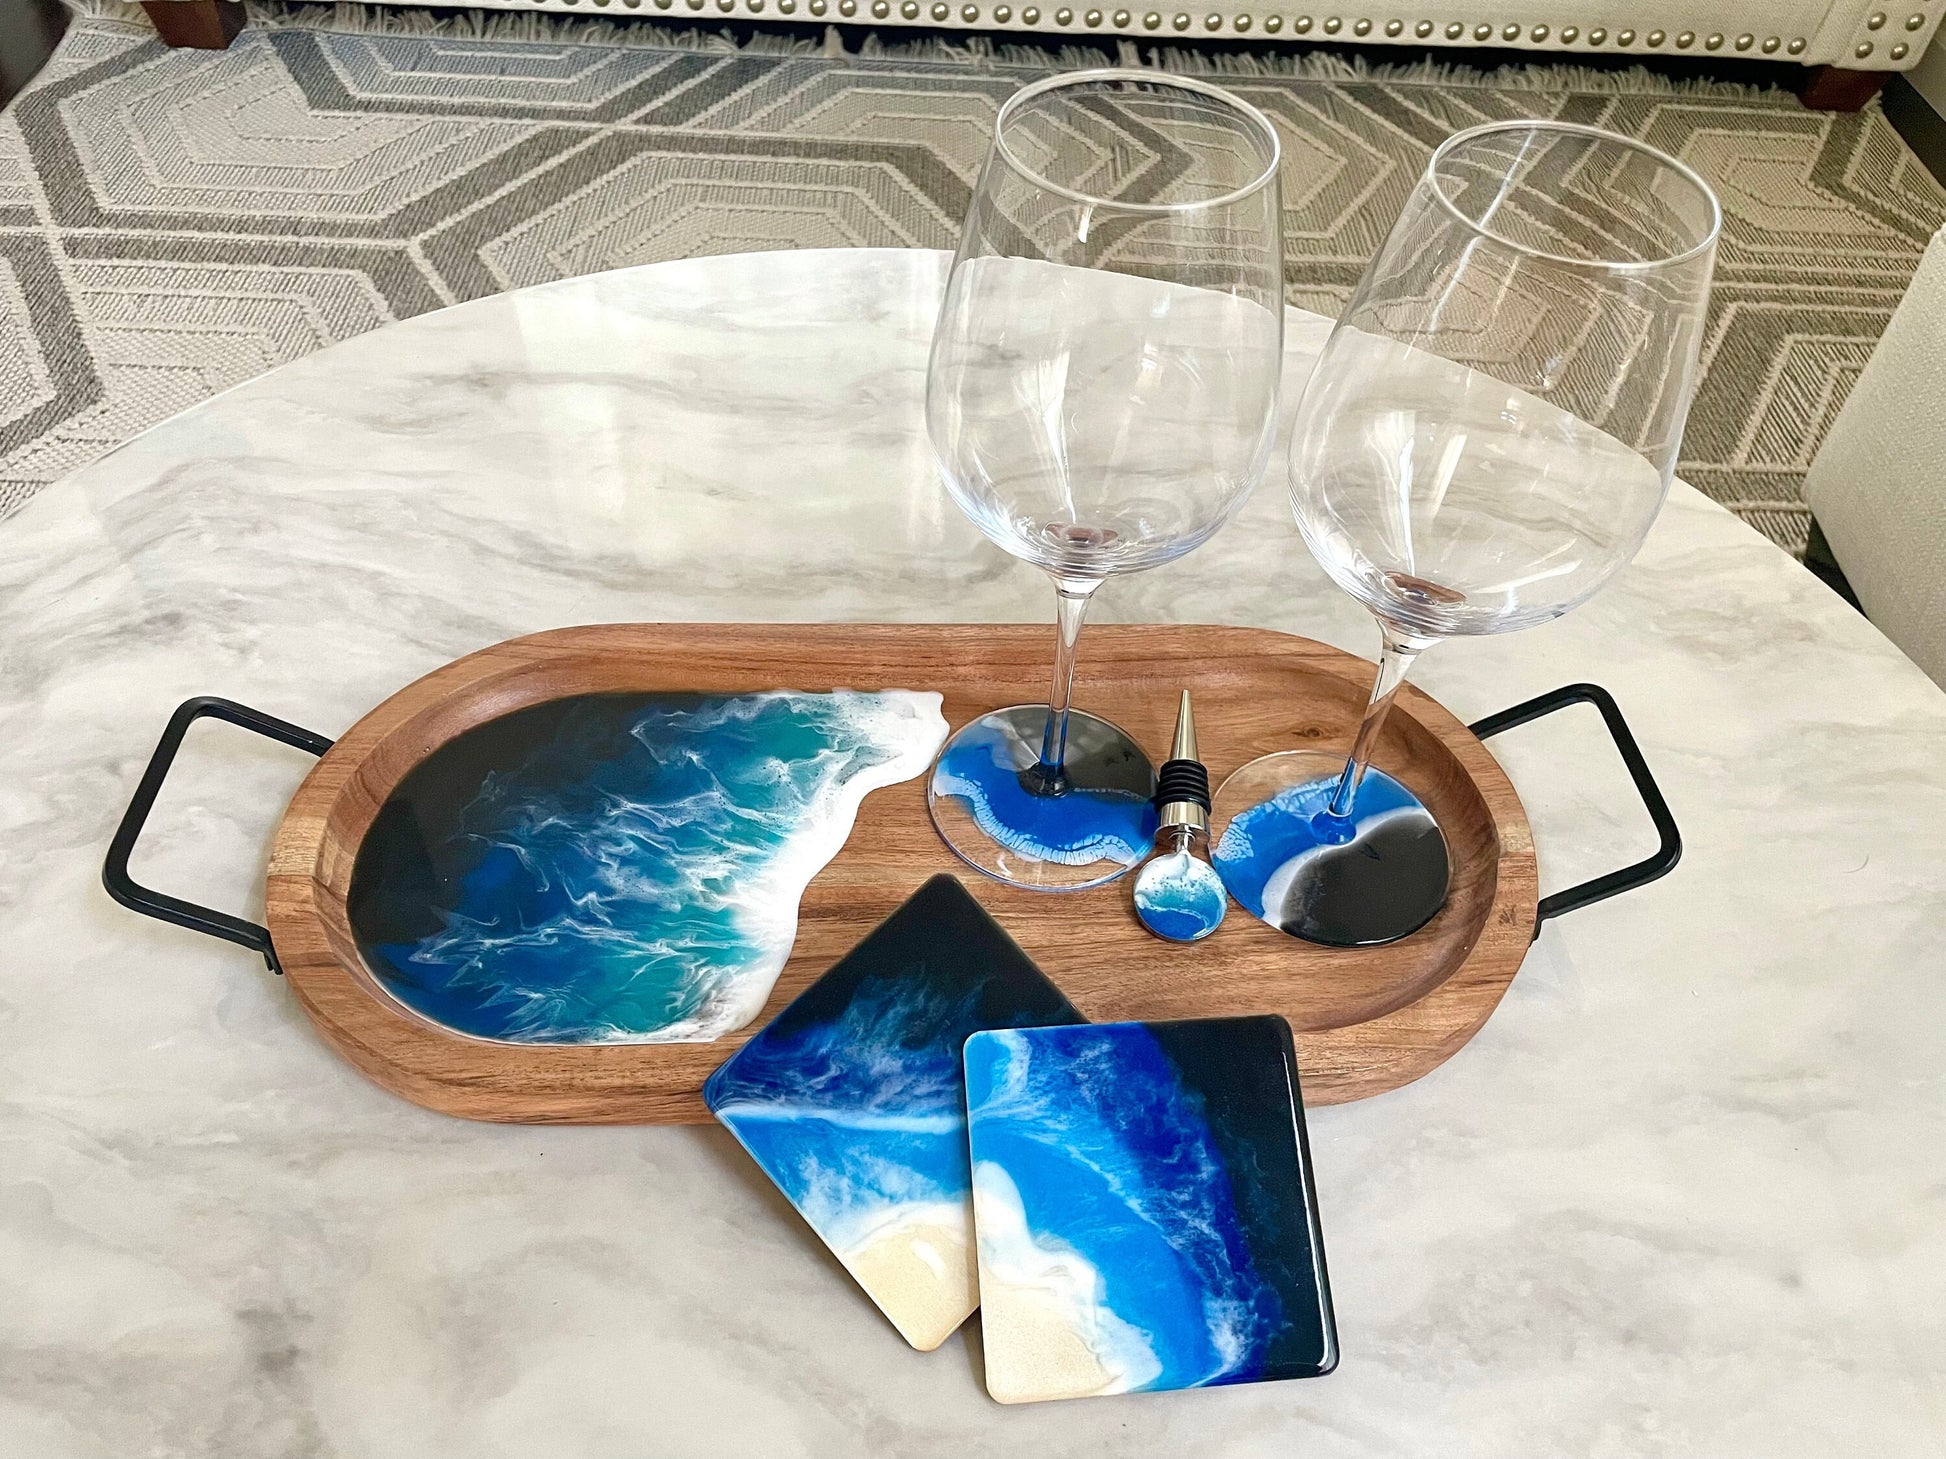 Ocean Wave wooden serving tray with handles, 2 matching wine glassess, glass charms, and wine stopper, and 2 matching coasters